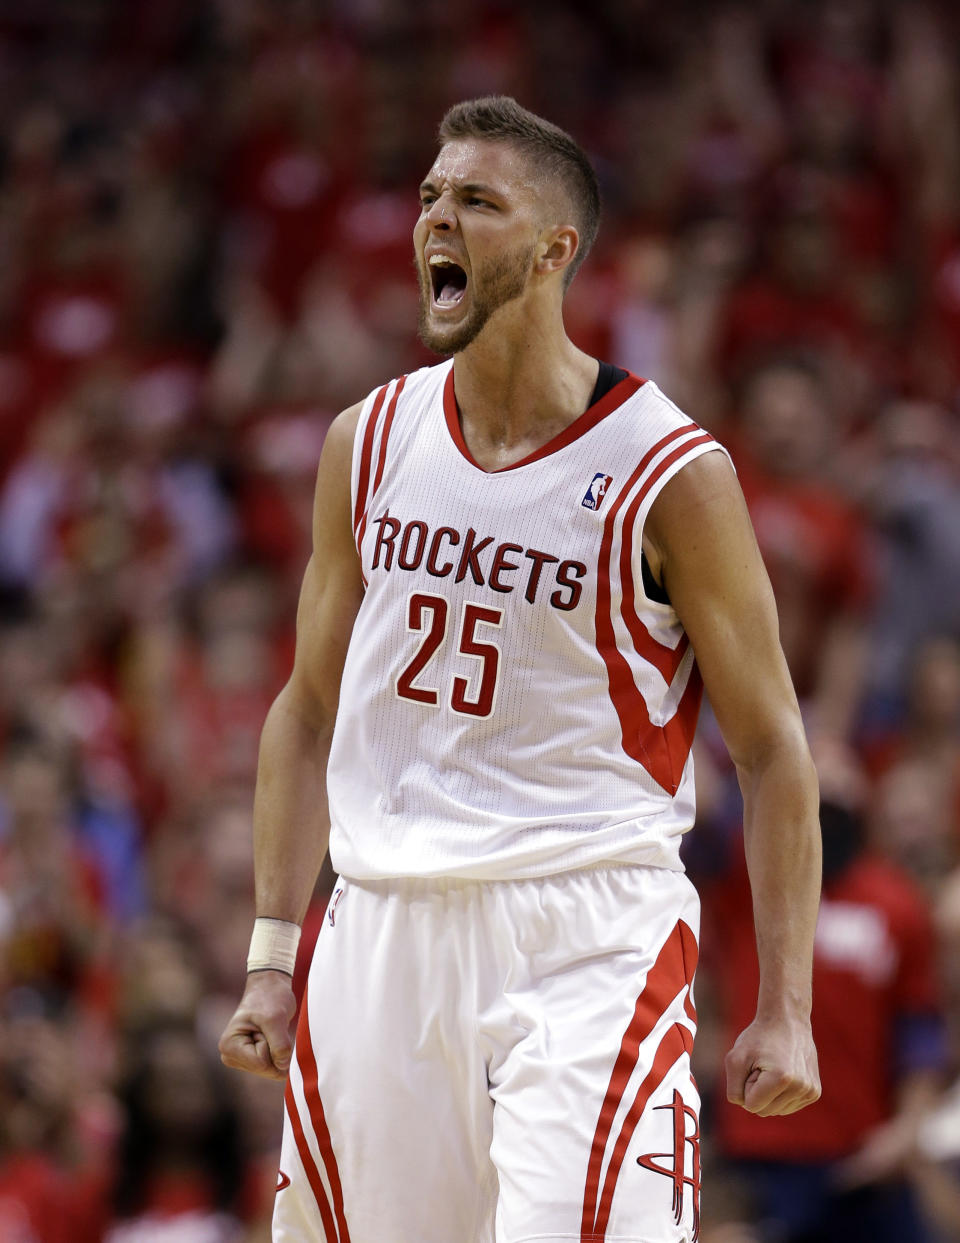 Houston Rockets' Chandler Parsons (25) reacts after making a three-point basket against the Portland Trail Blazers during the second quarter in Game 1 of an opening-round NBA basketball playoff series Sunday, April 20, 2014, in Houston. (AP Photo/David J. Phillip)